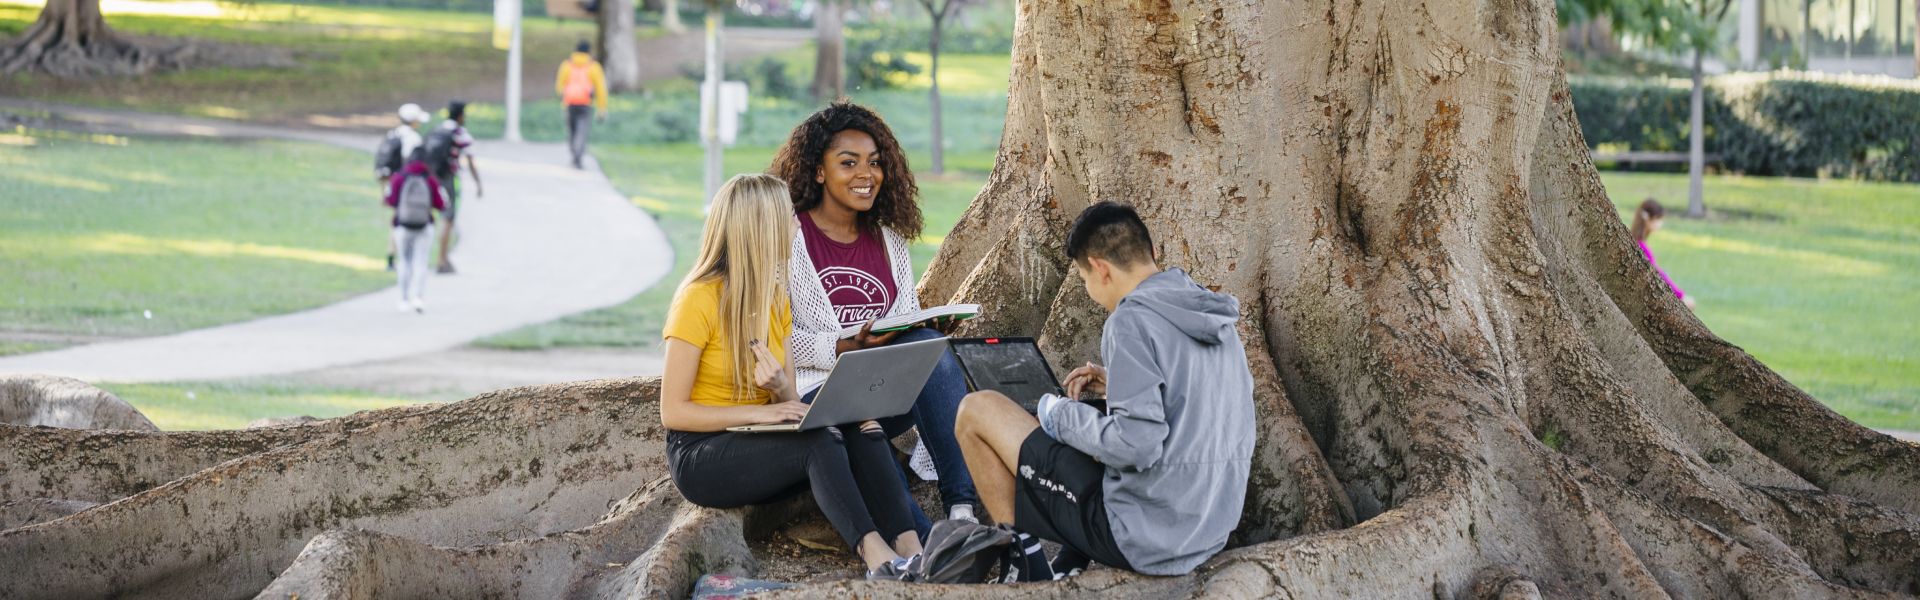 Group of students studying together outside